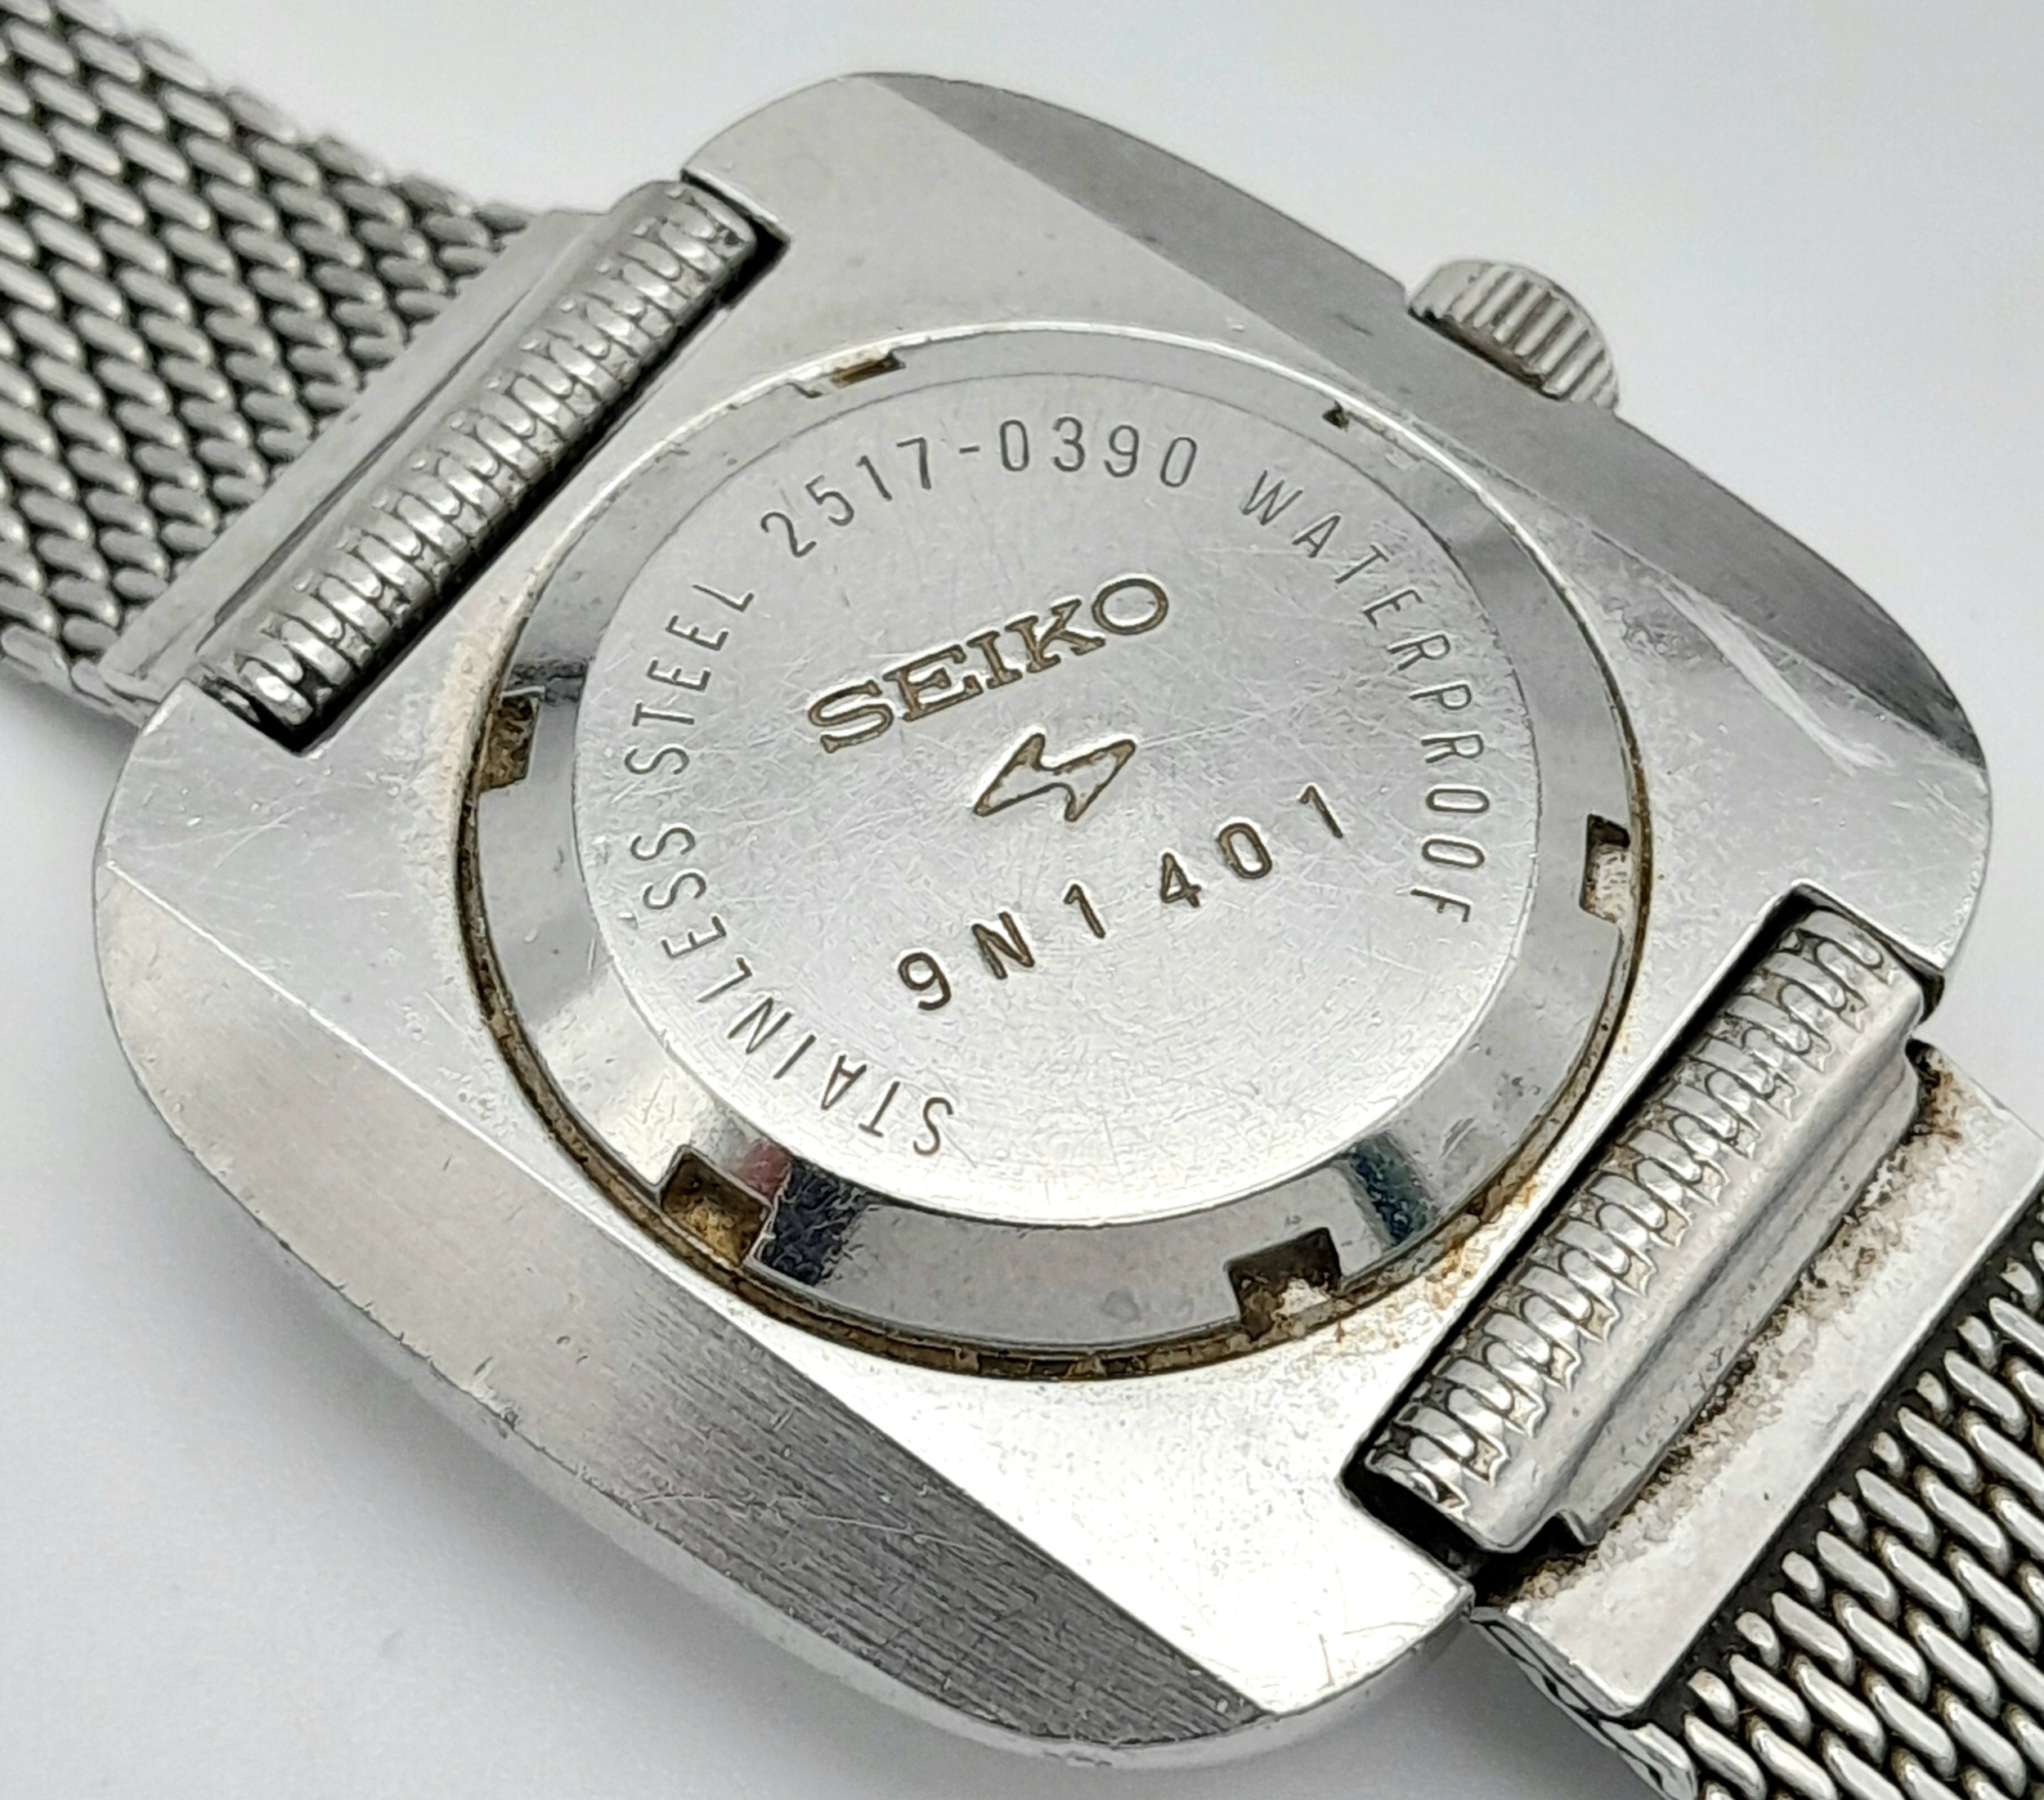 A Vintage Seiko Automatic Ladies Watch. Stainless steel bracelet and case - 29mm. Model 2517-0390. - Image 4 of 5